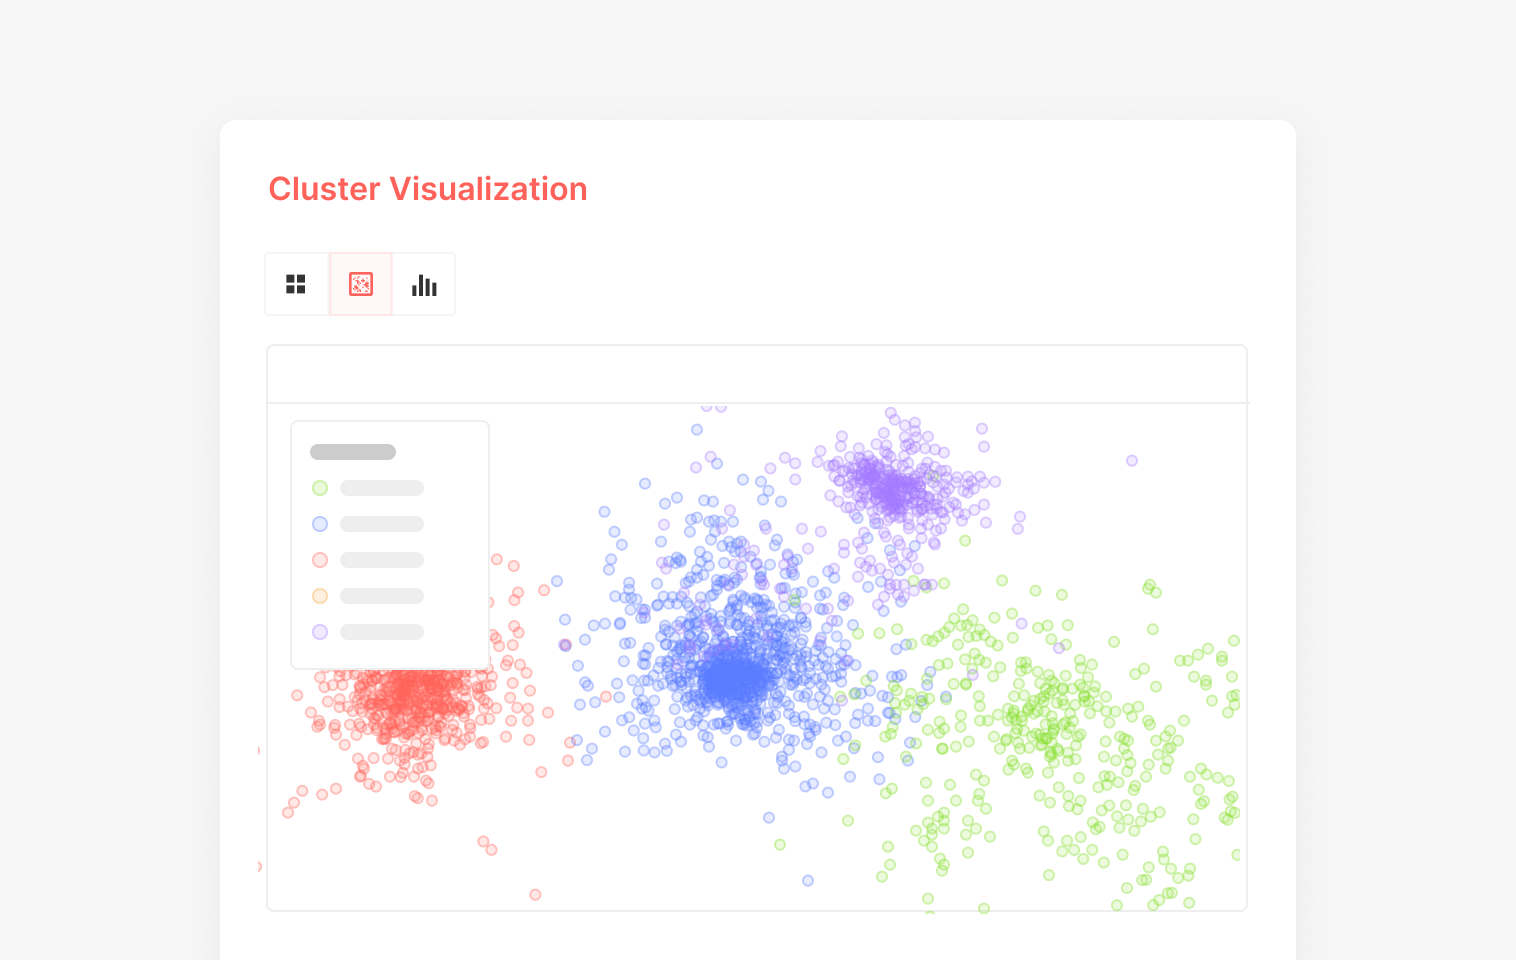 Snapshot of Superb Curate cluster visualization of computer vision data.